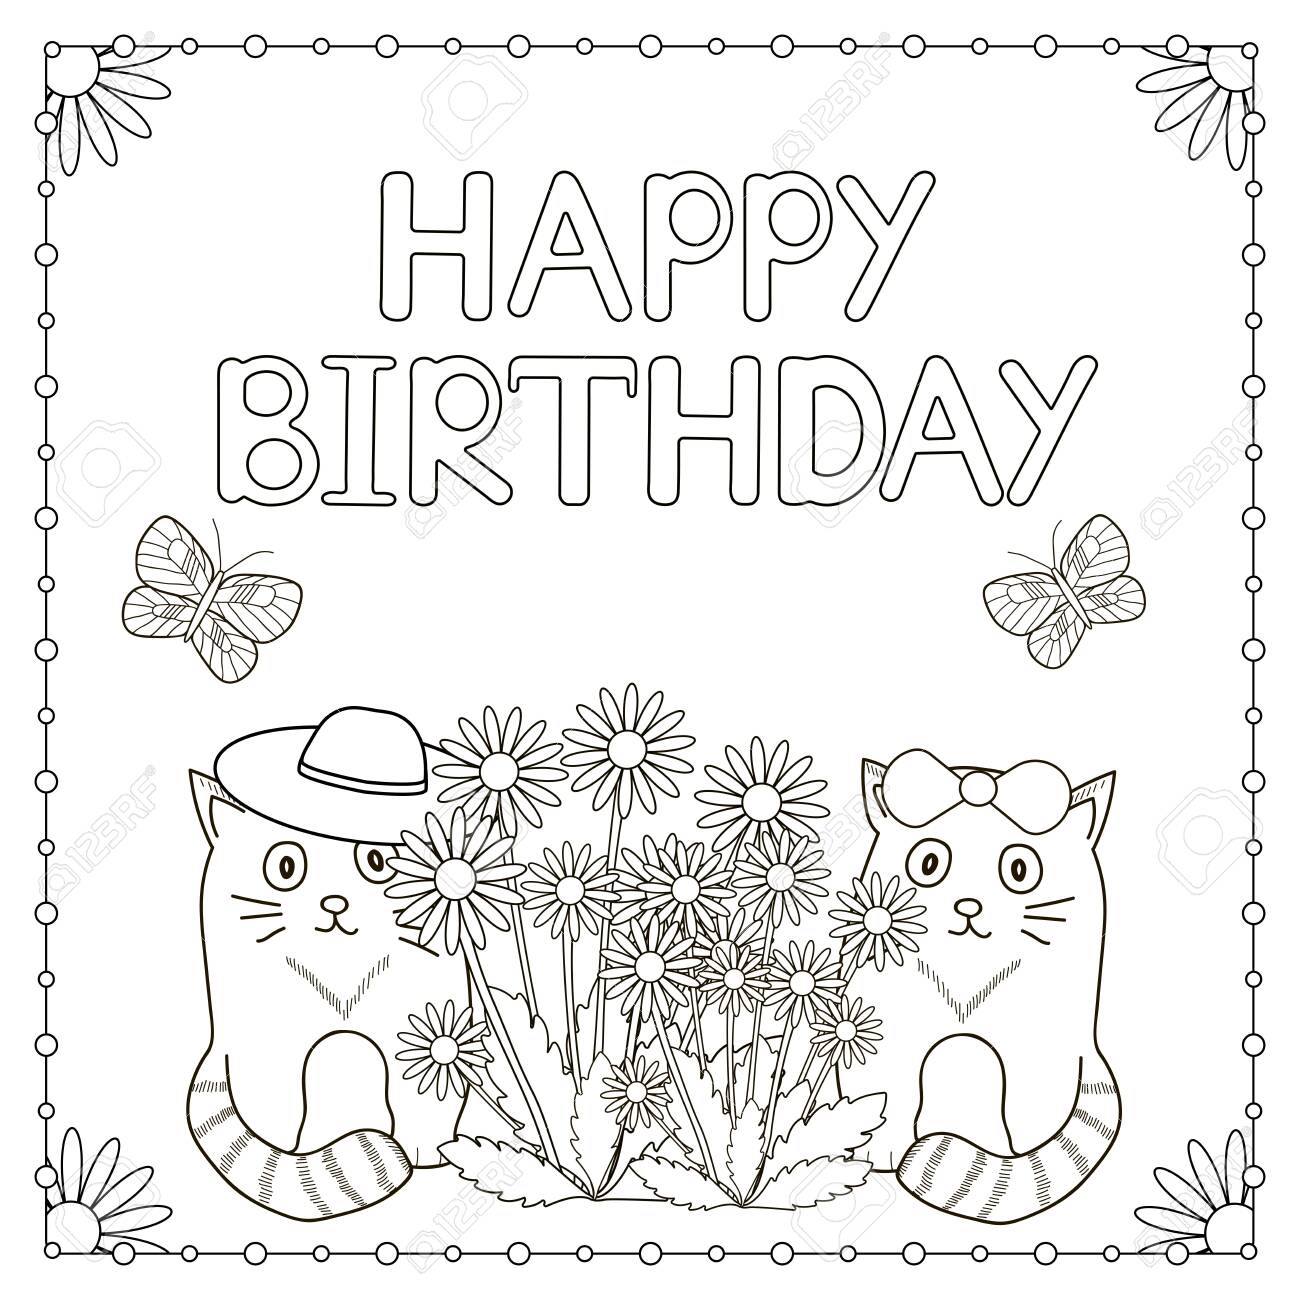 Coloring Books For Kids To Print Free Happy Birthday Sheets Printable Pages  Adults On Amazon – Approachingtheelephant